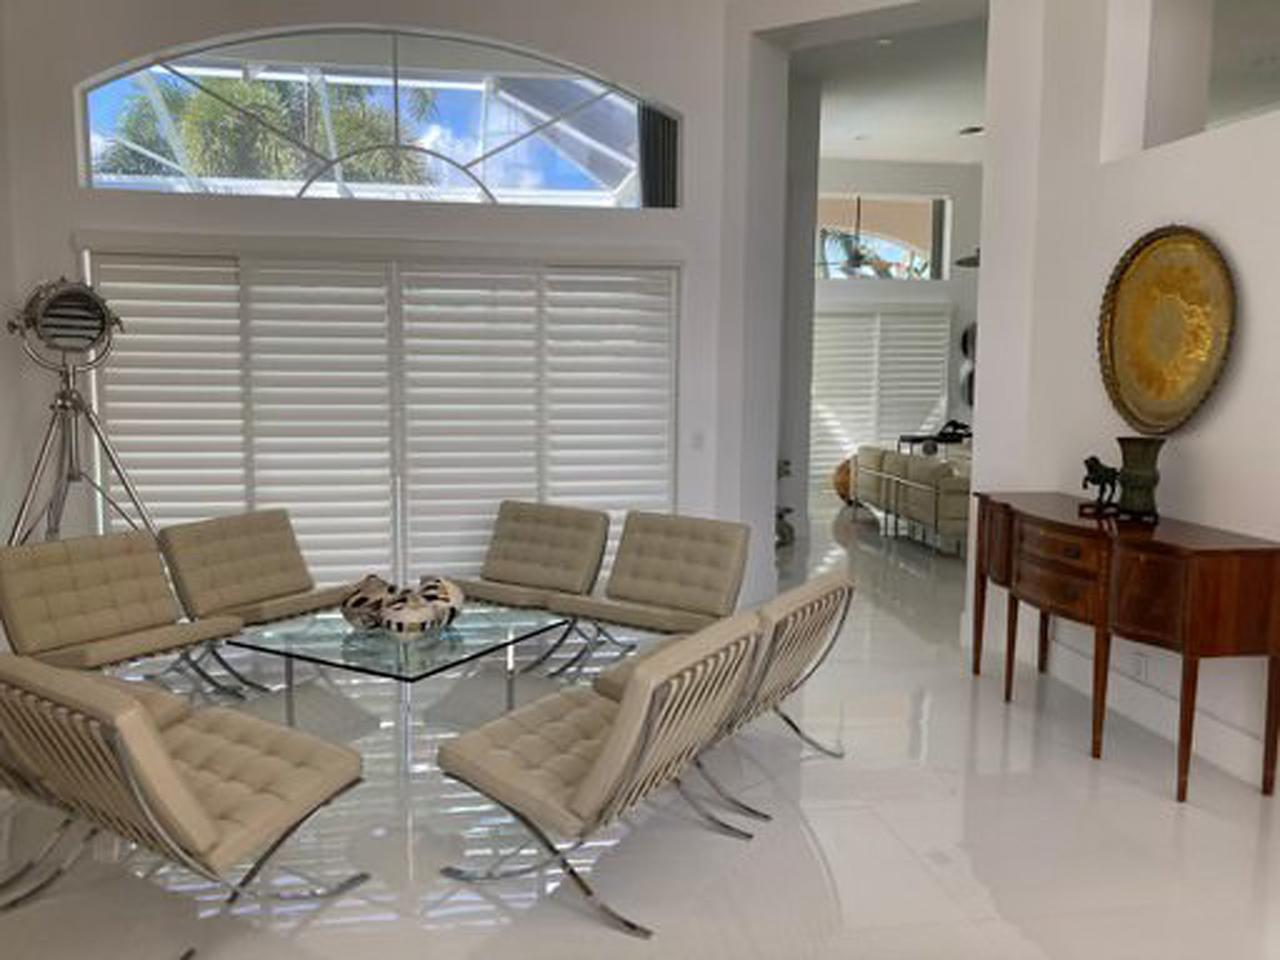 Dining area with bypass shutters on sliding glass doors